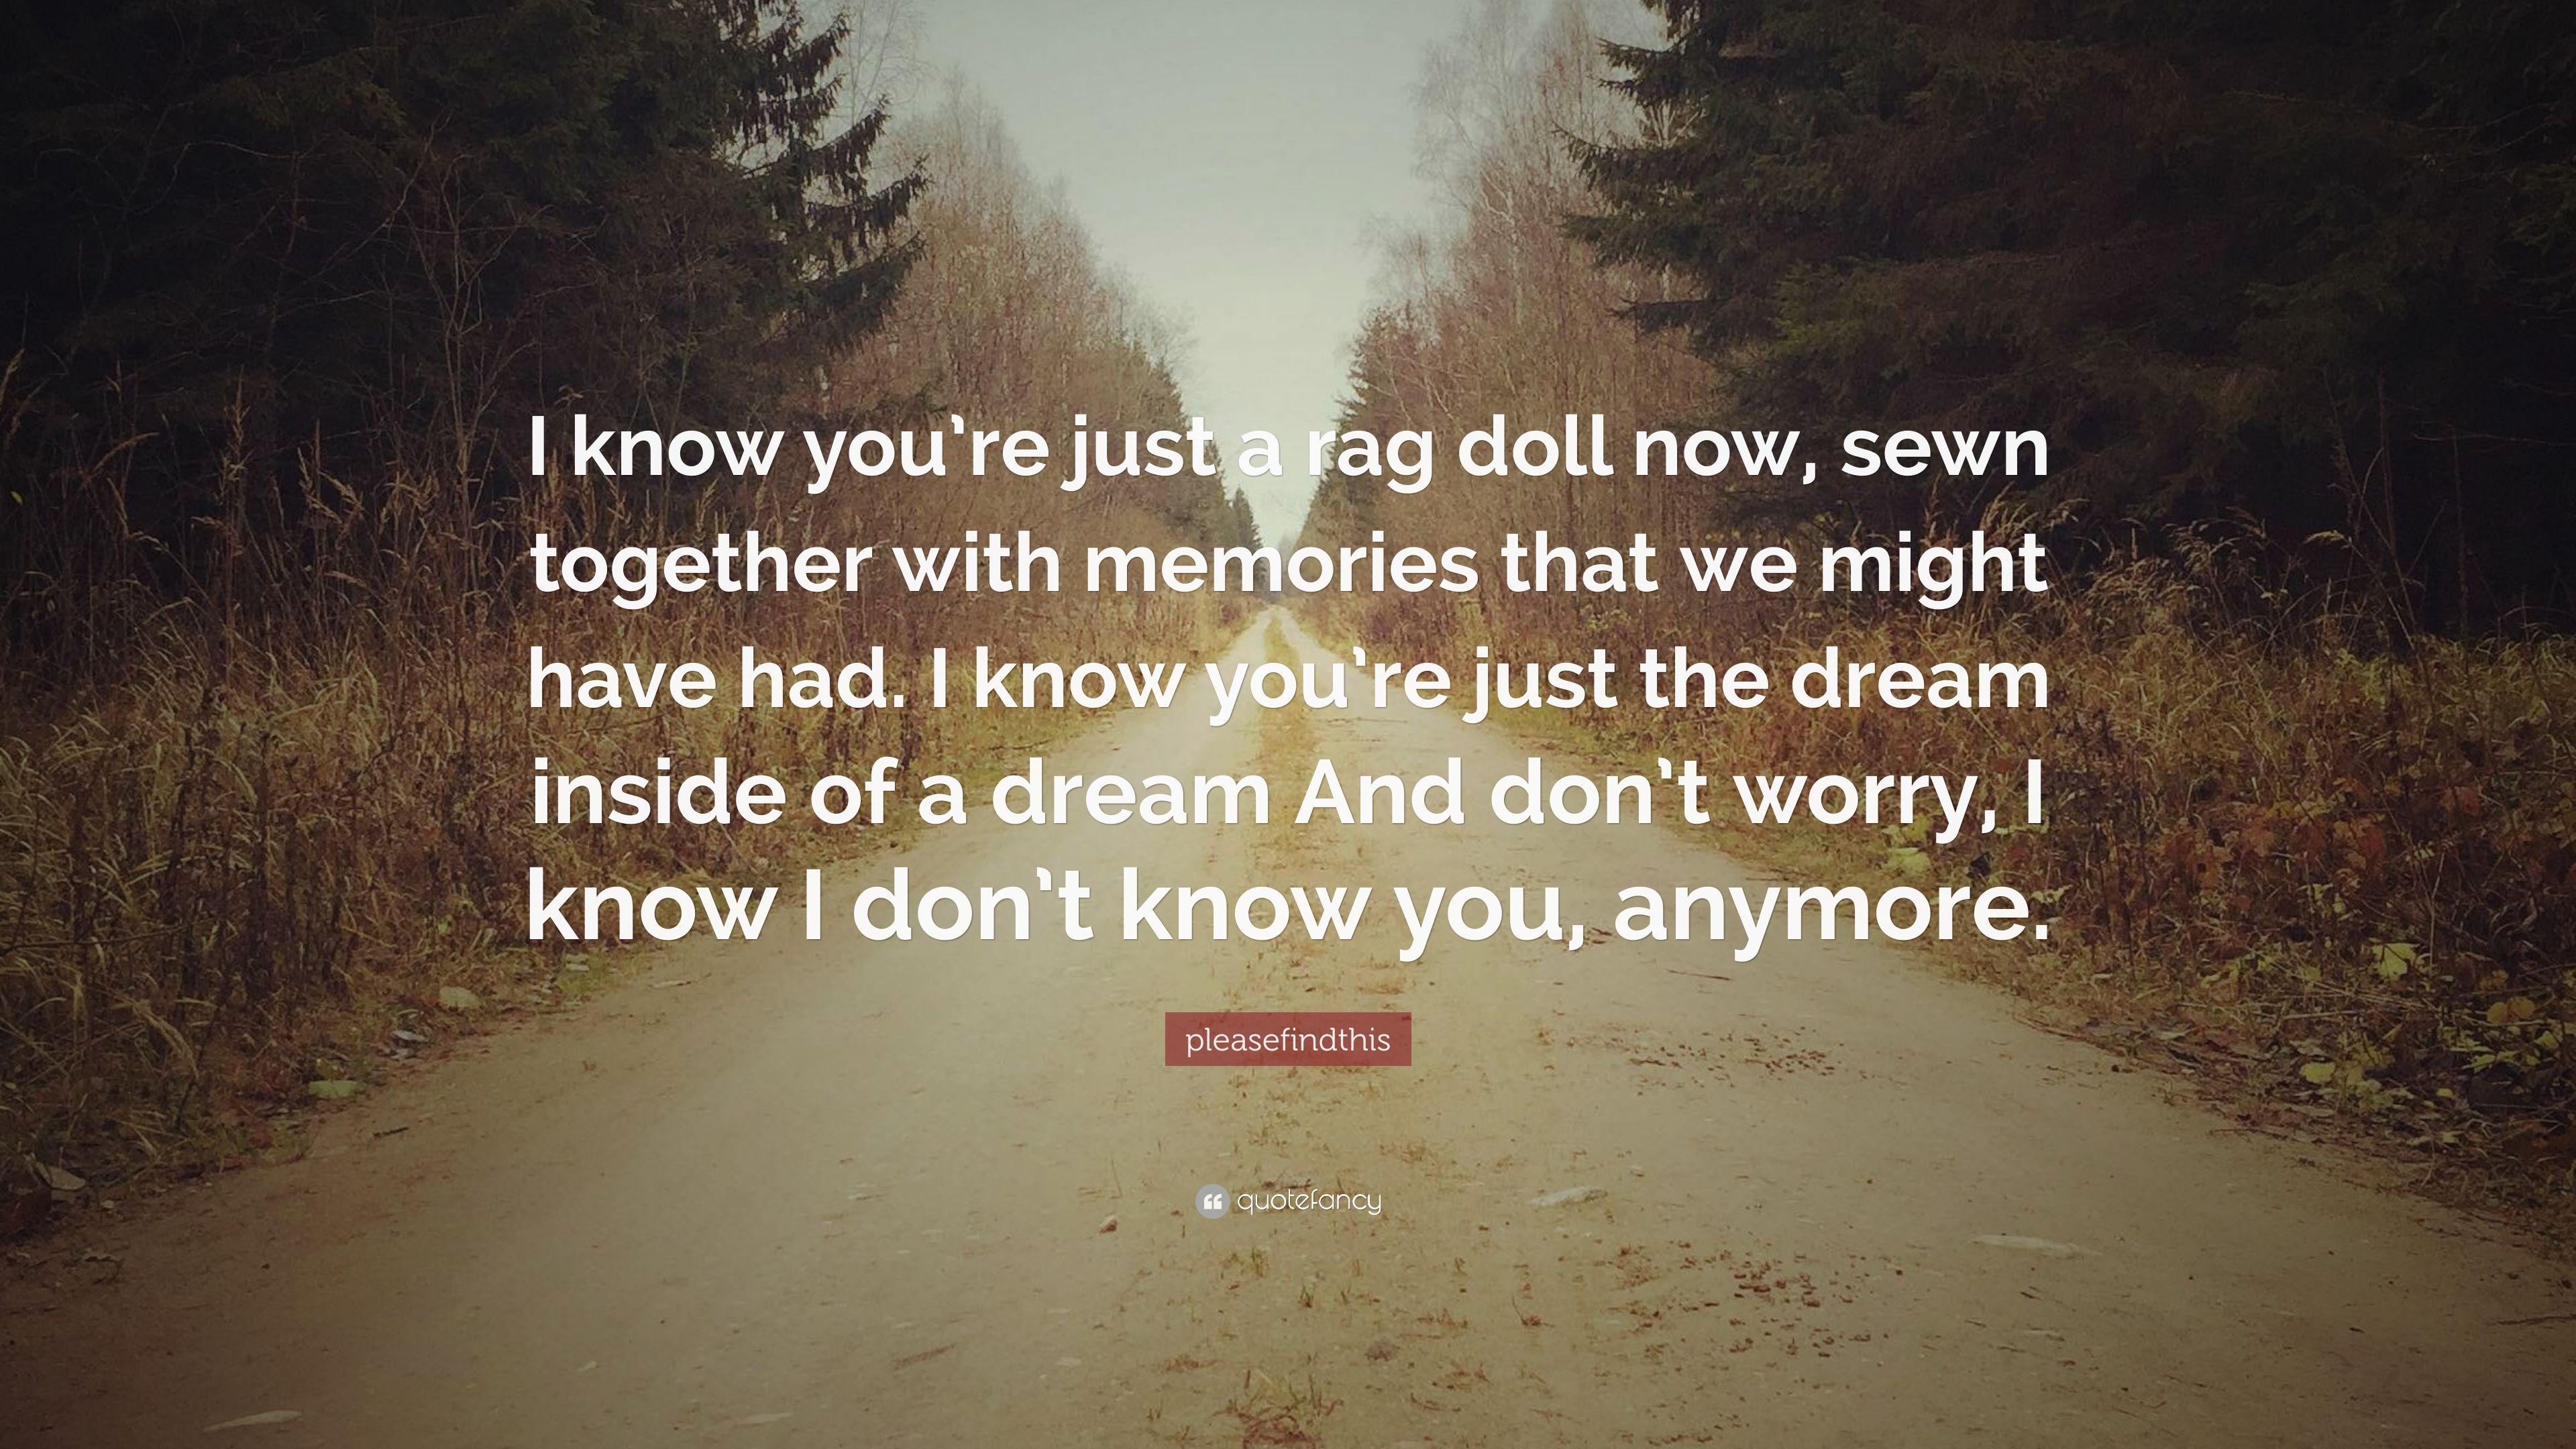 pleasefindthis Quote: “I know you're just a rag doll now